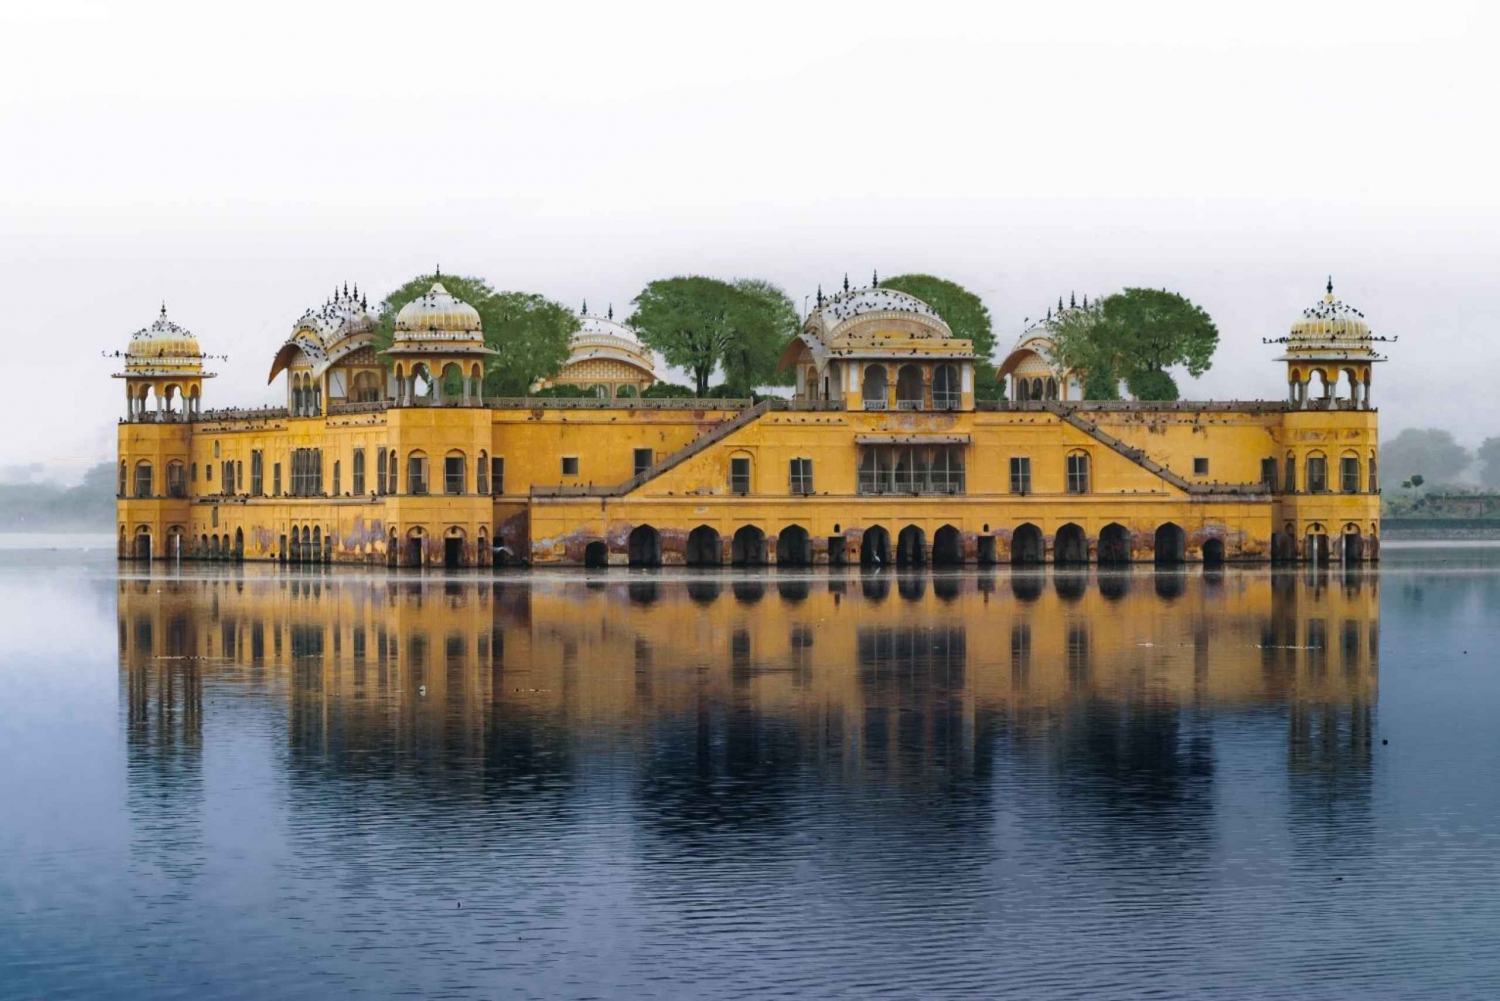 Two days Jaipur tour with guide by private car.